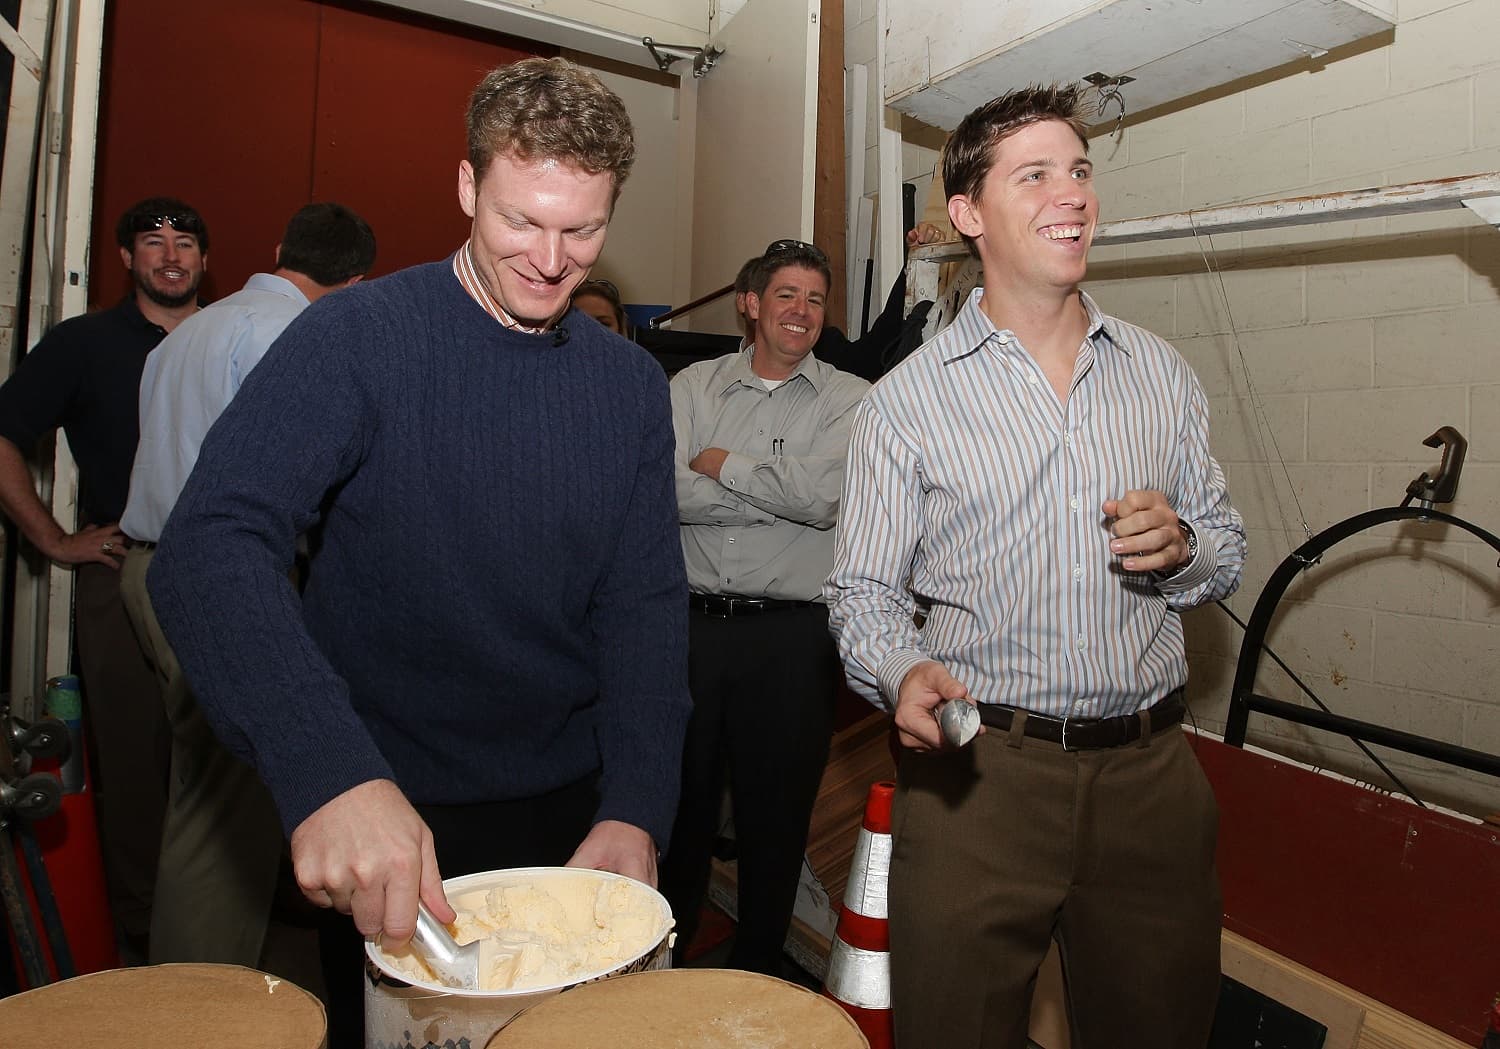 Dale Earnhardt Jr. and Denny Hamlin practice an ice cream throwing stunt backstage prior to their appearance on 'Live with Regis and Kelly' during the NASCAR Chase Media Tour on Sept. 10, 2008, in New York City.  | Mike Stobe/Getty Images for NASCAR